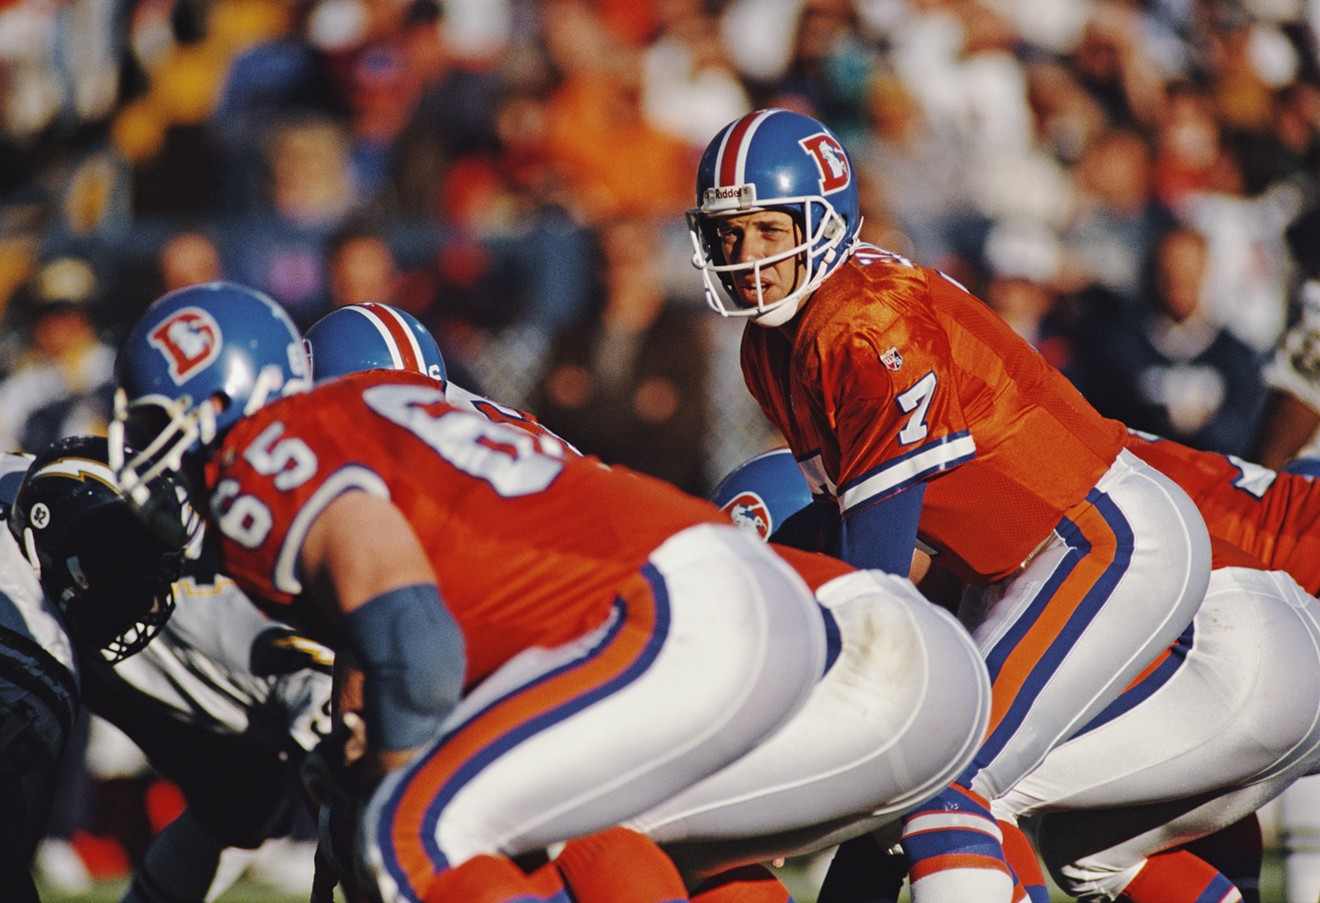 John Elway looked sharp in these Broncos uniforms, but the organization wants to try something new.